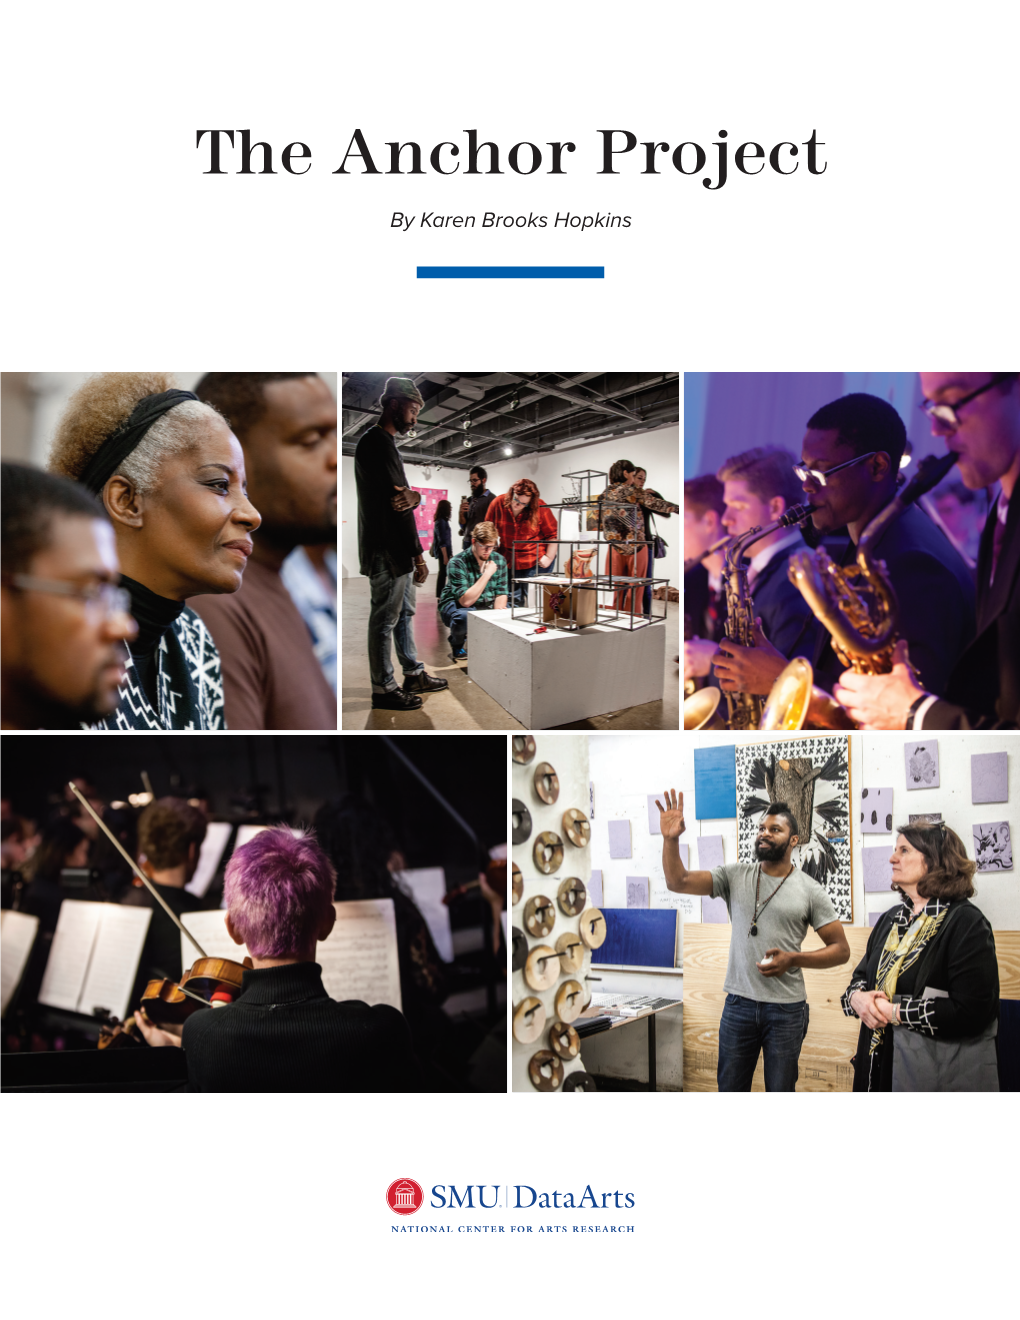 The Anchor Project